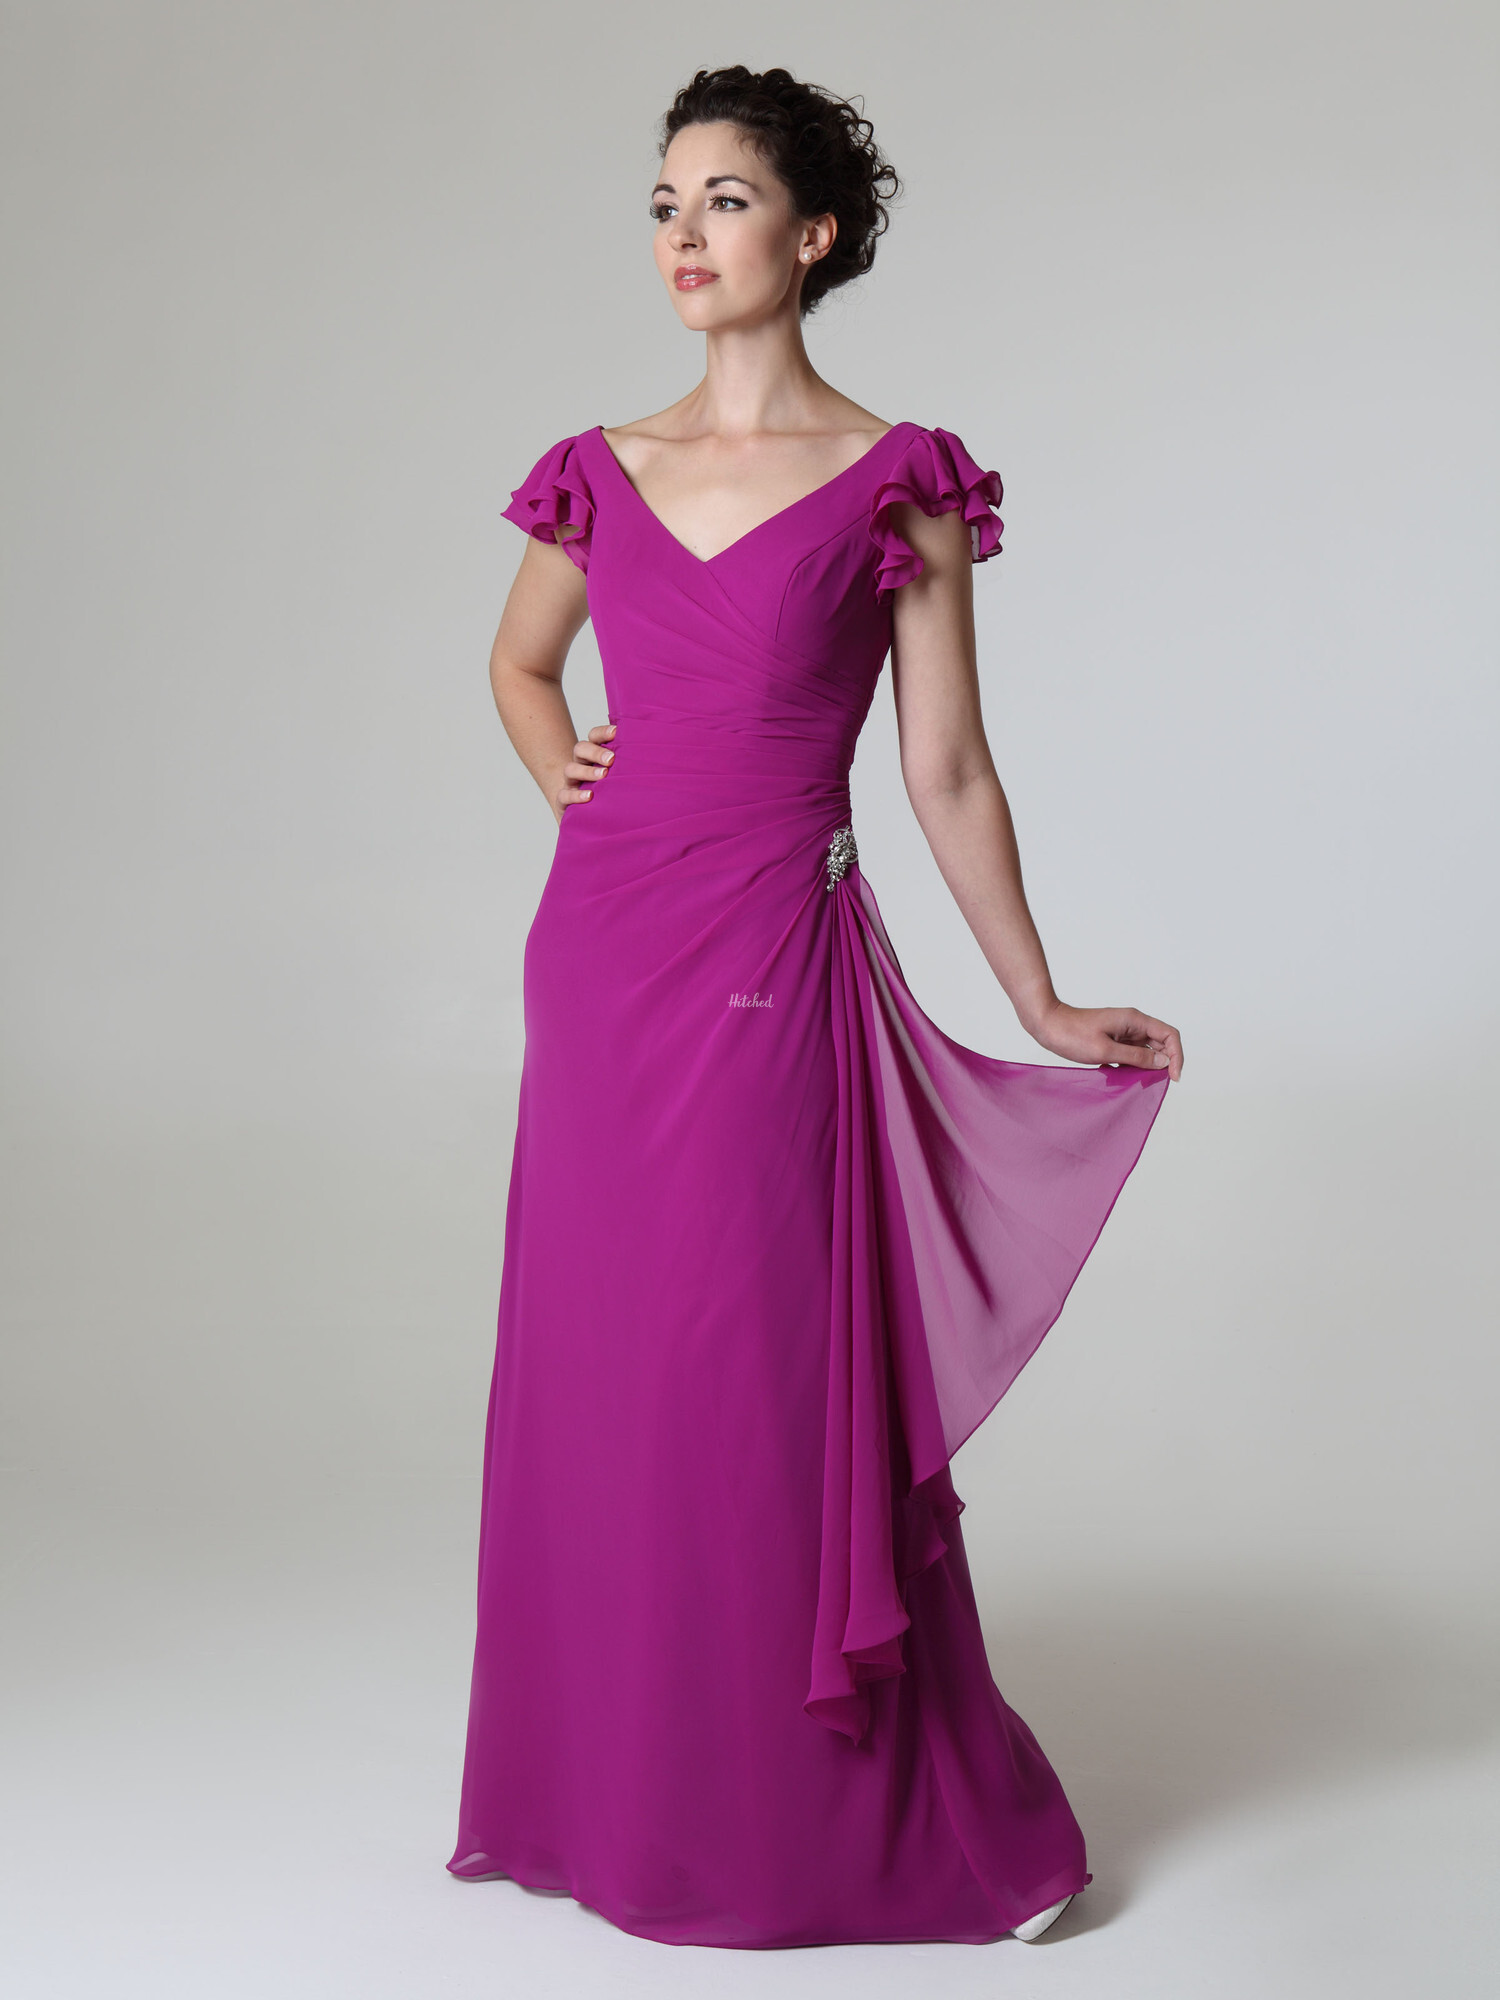 PM066 Bridesmaid Dress from Pretty Maids - hitched.co.uk